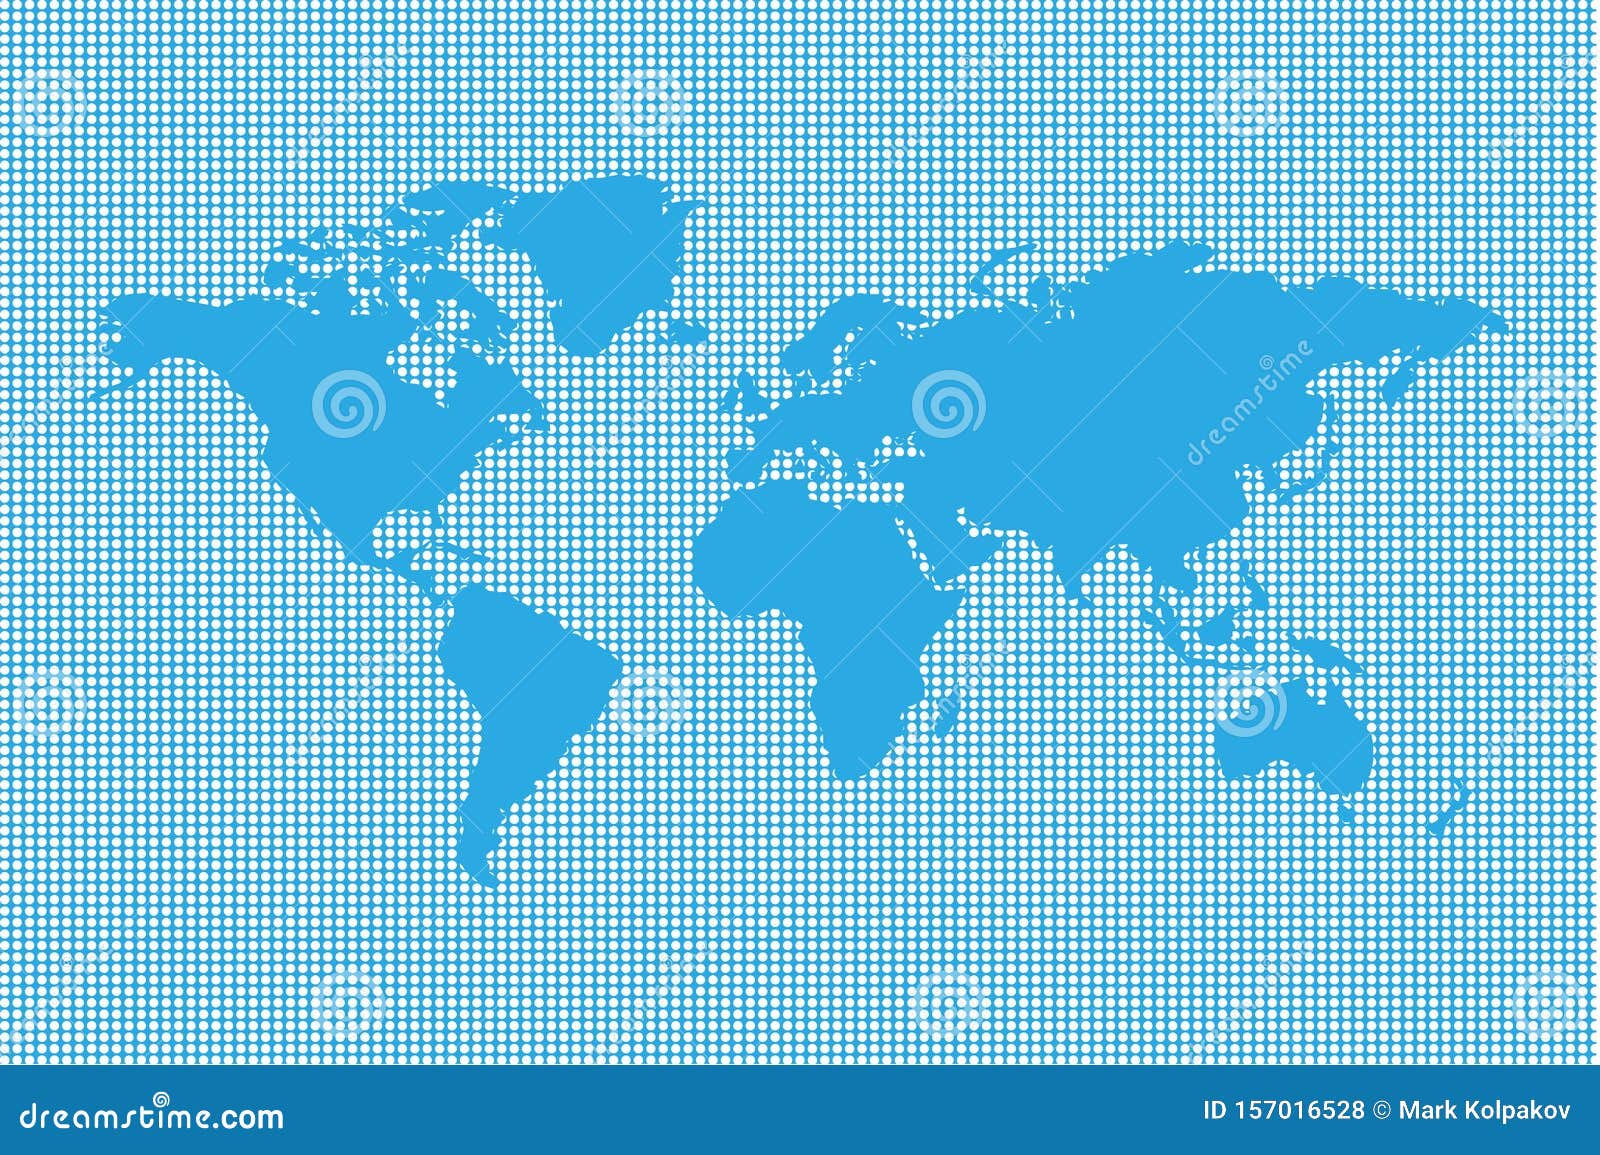 World Map Blue Background With White Circles Stock Vector